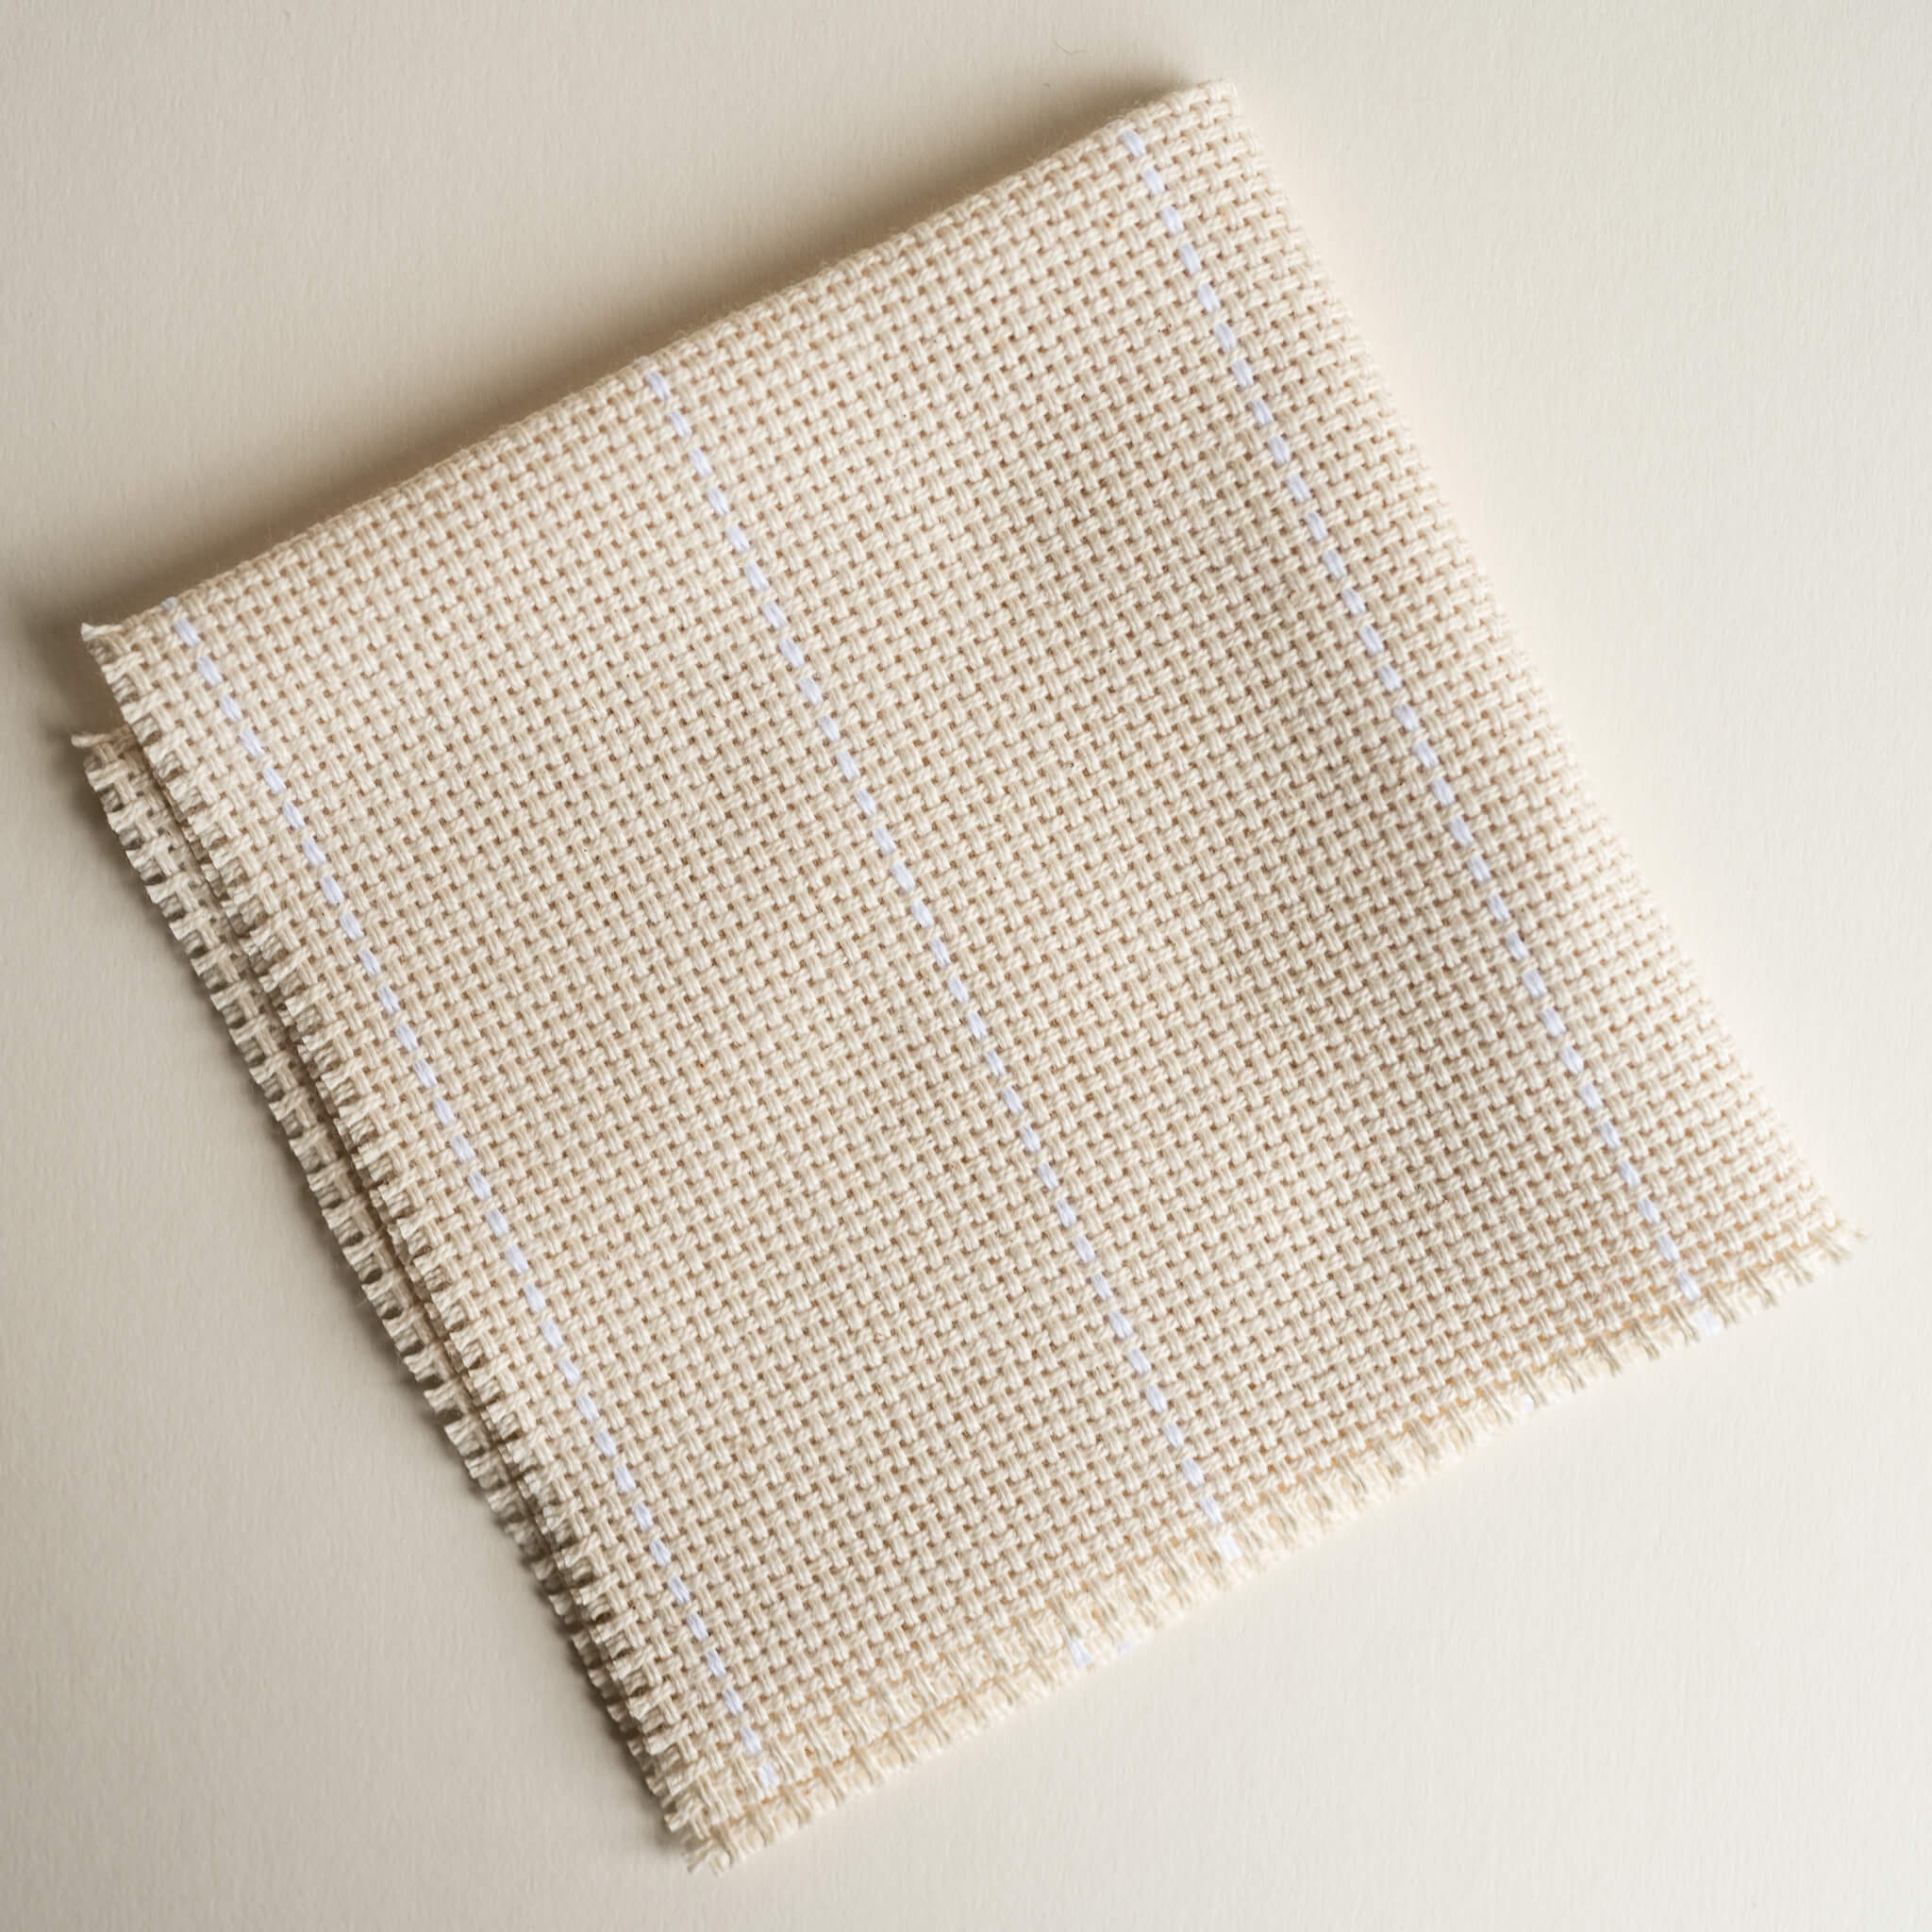 Cream monks cloth with white guidelines